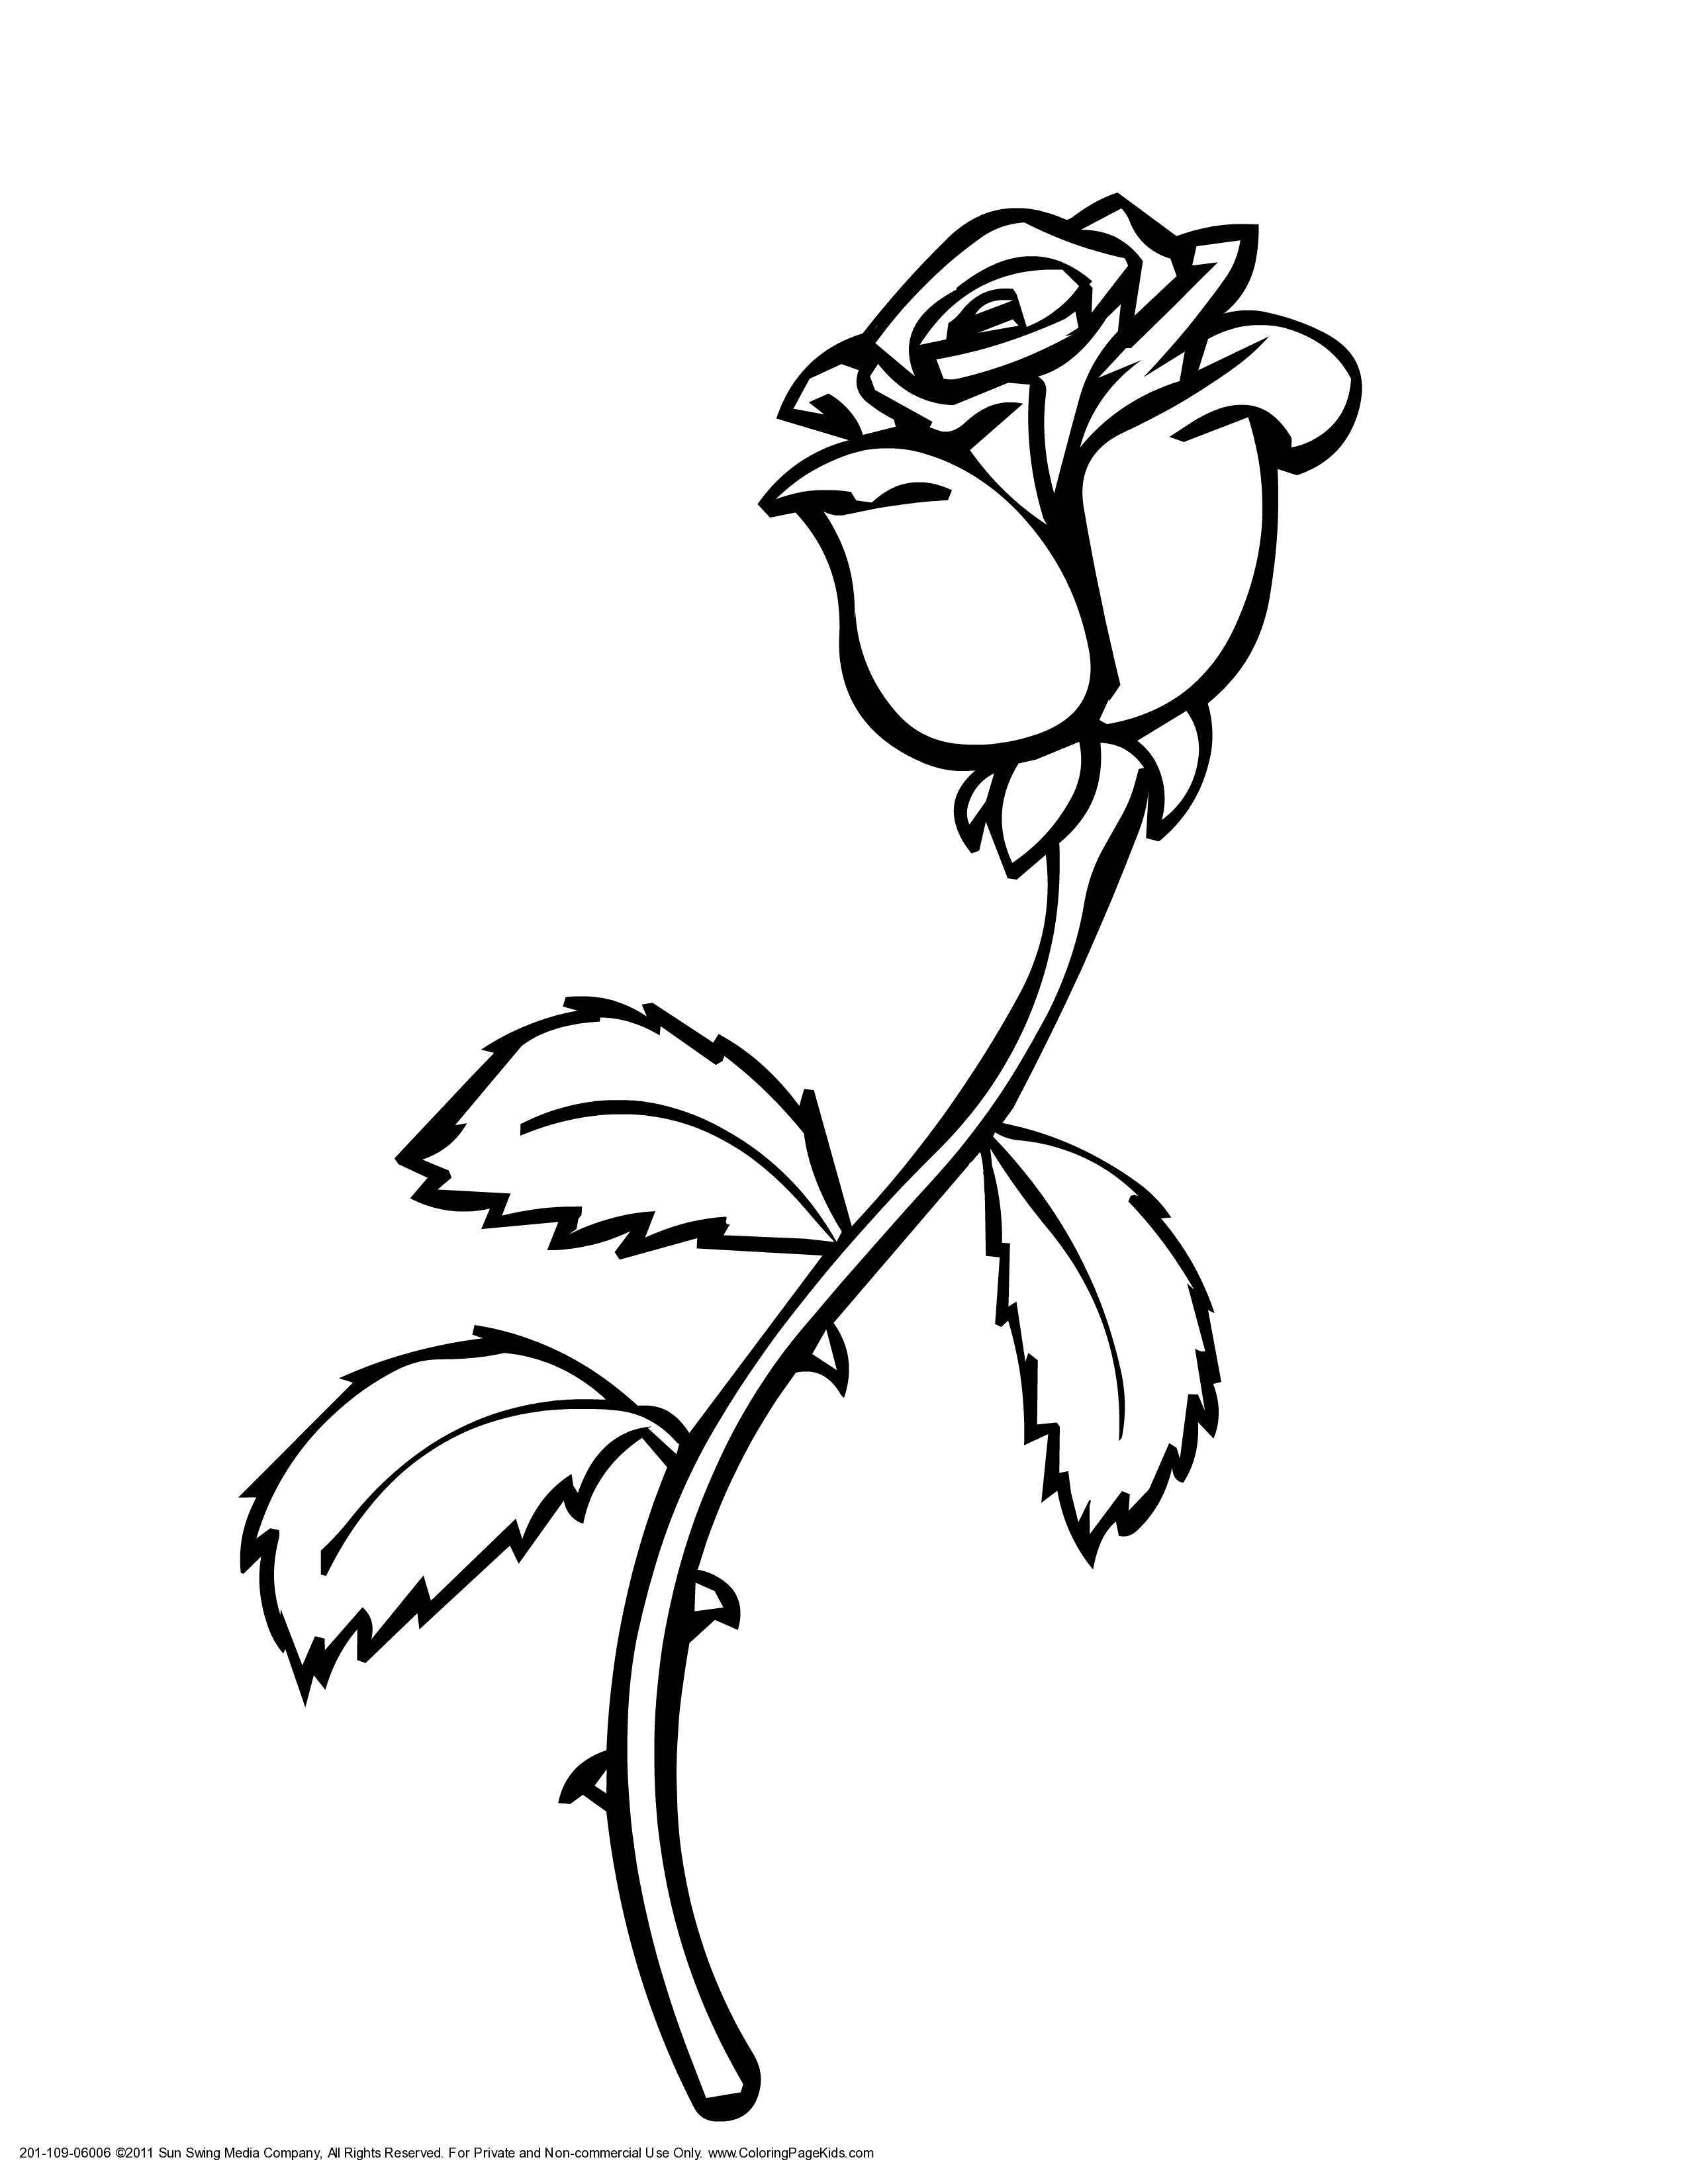 Rose drawing clipart